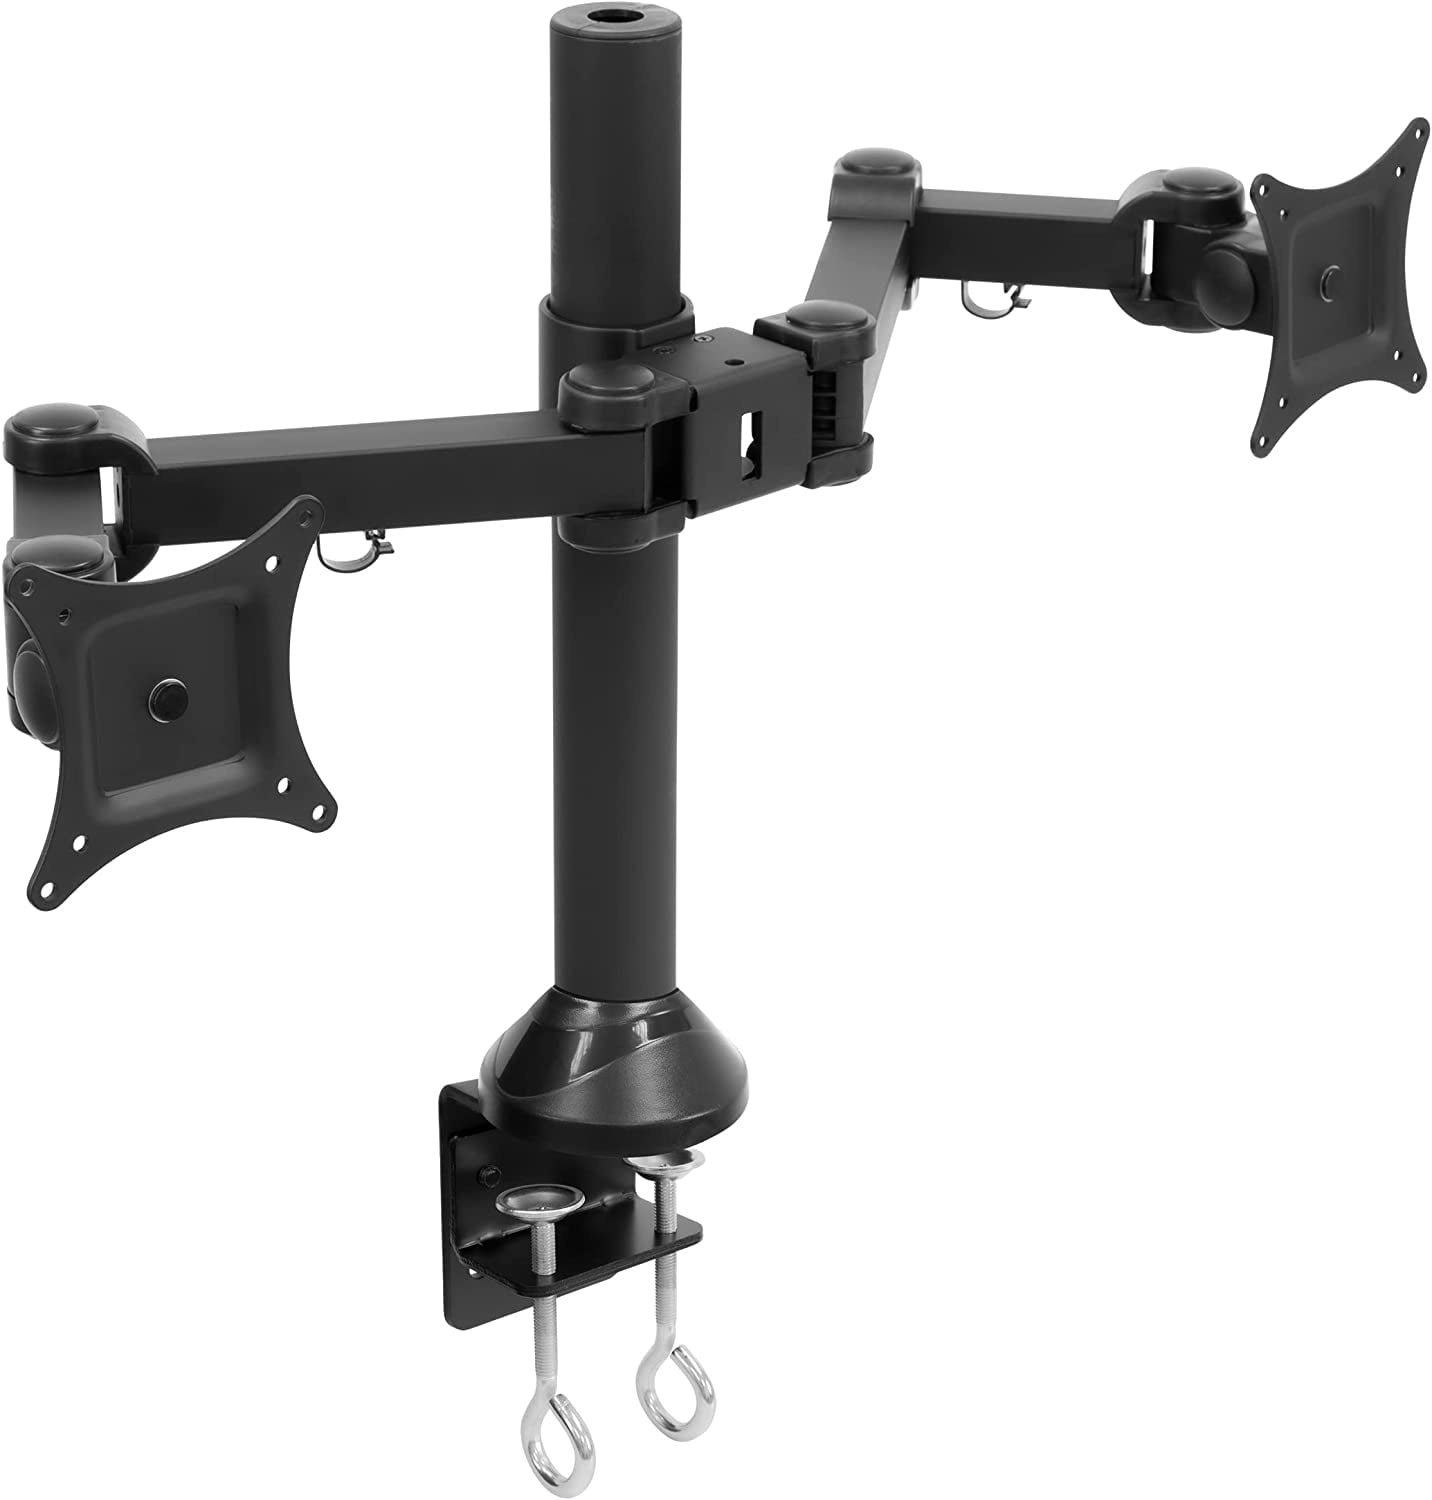 Mount-It! Dual Monitor Desk Mount for 13 in. to 27 in. Screens, Black